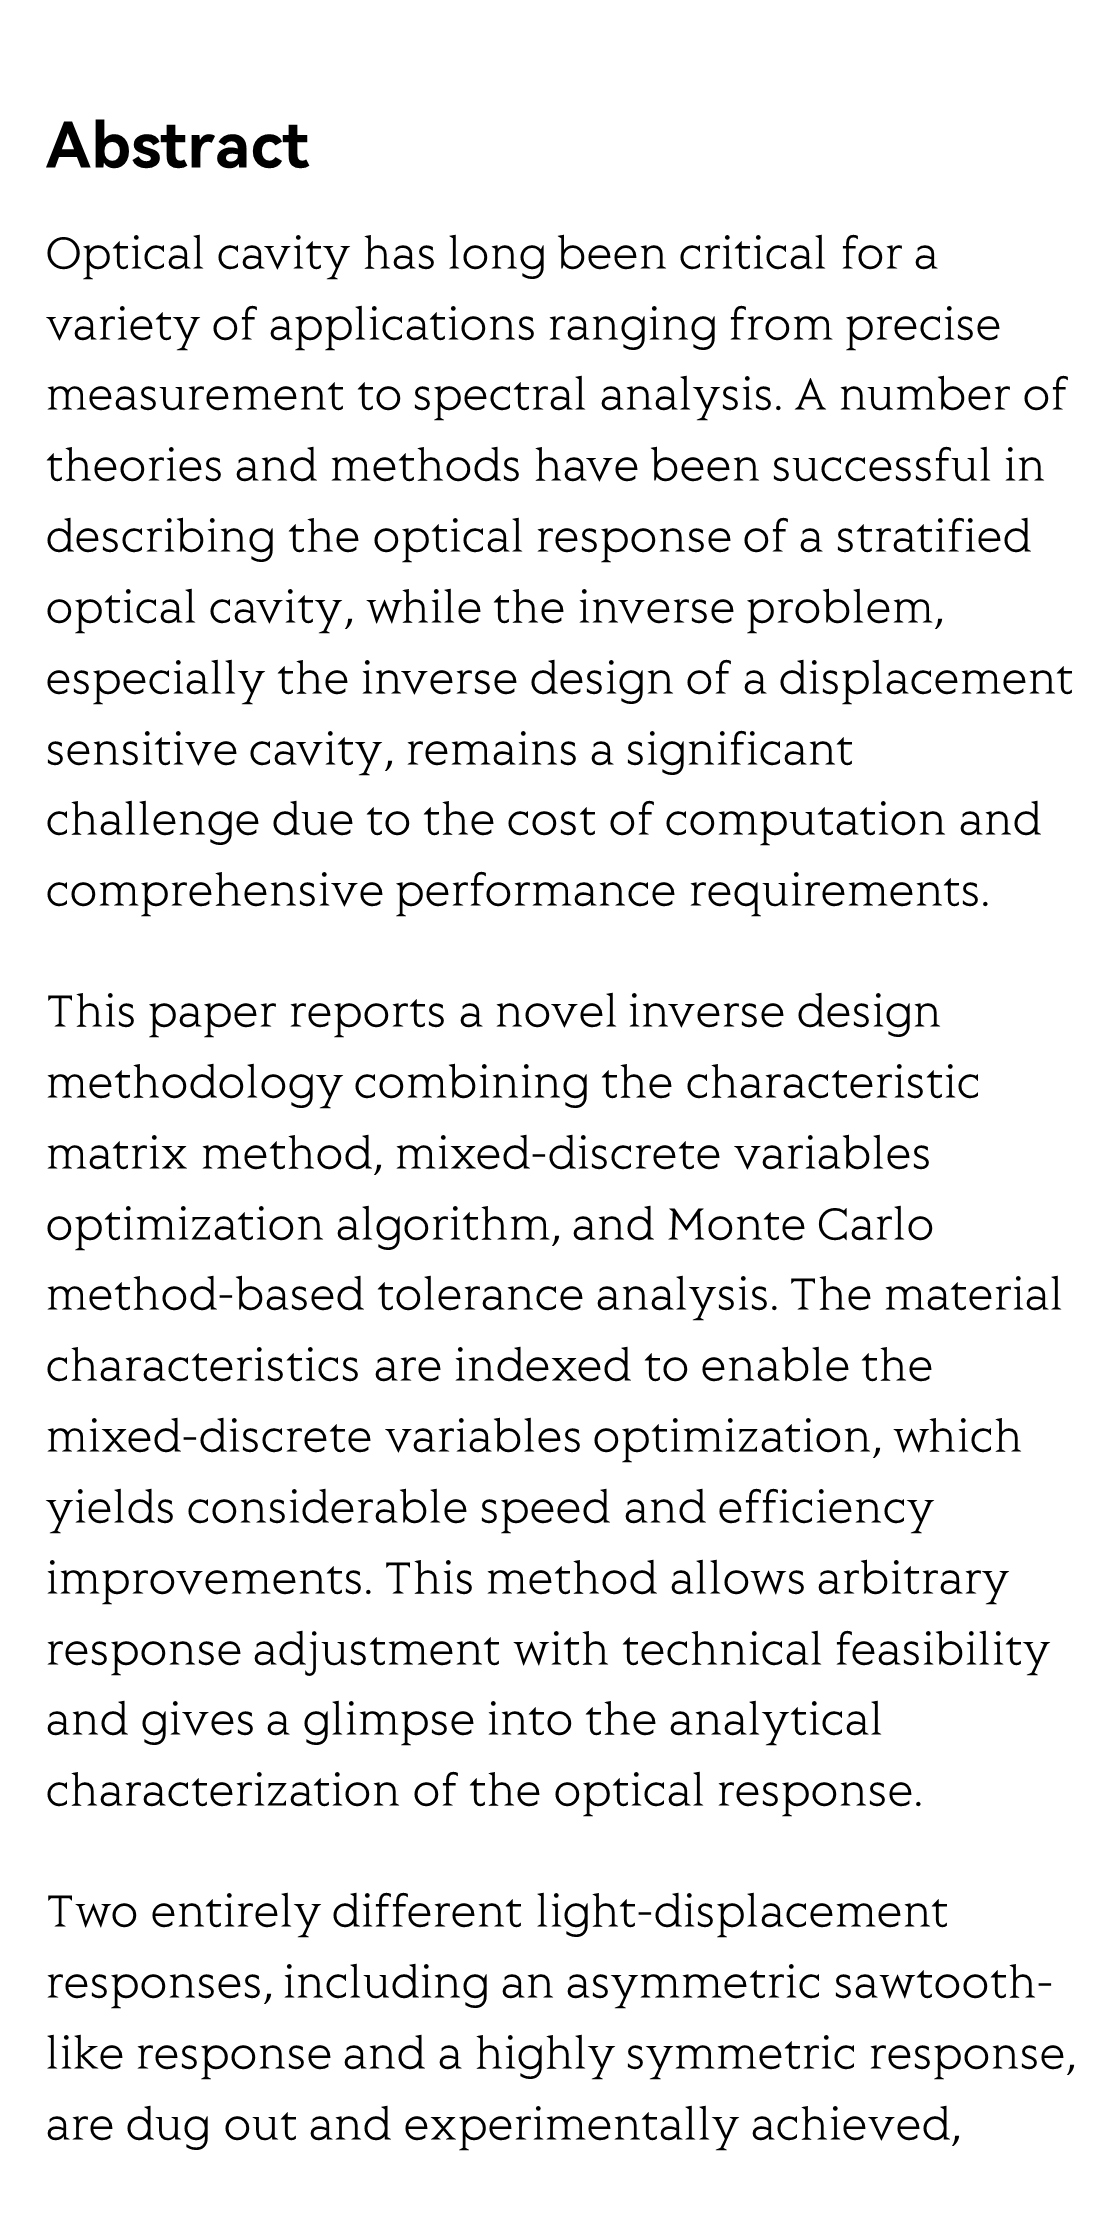 Inverse design and realization of an optical cavity-based displacement transducer with arbitrary responses_2